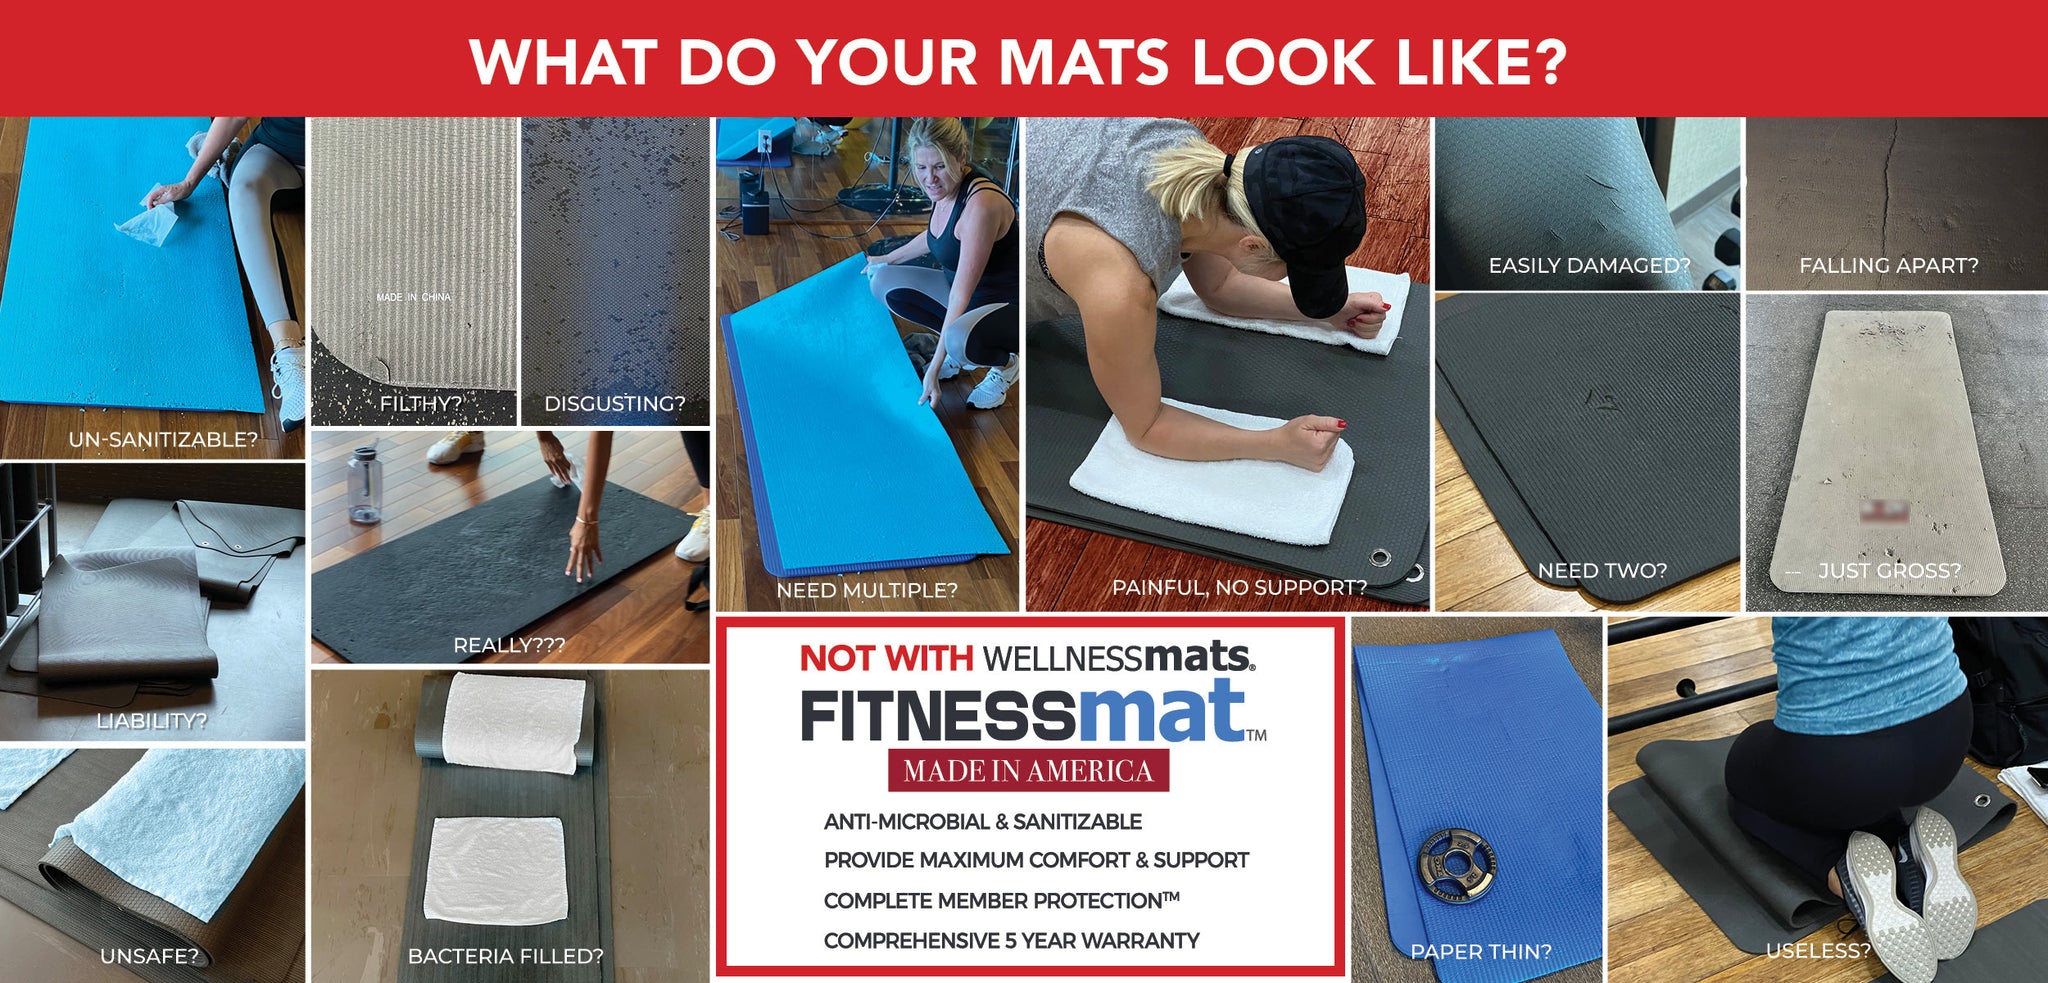 Issues with other mats in the fitness industry